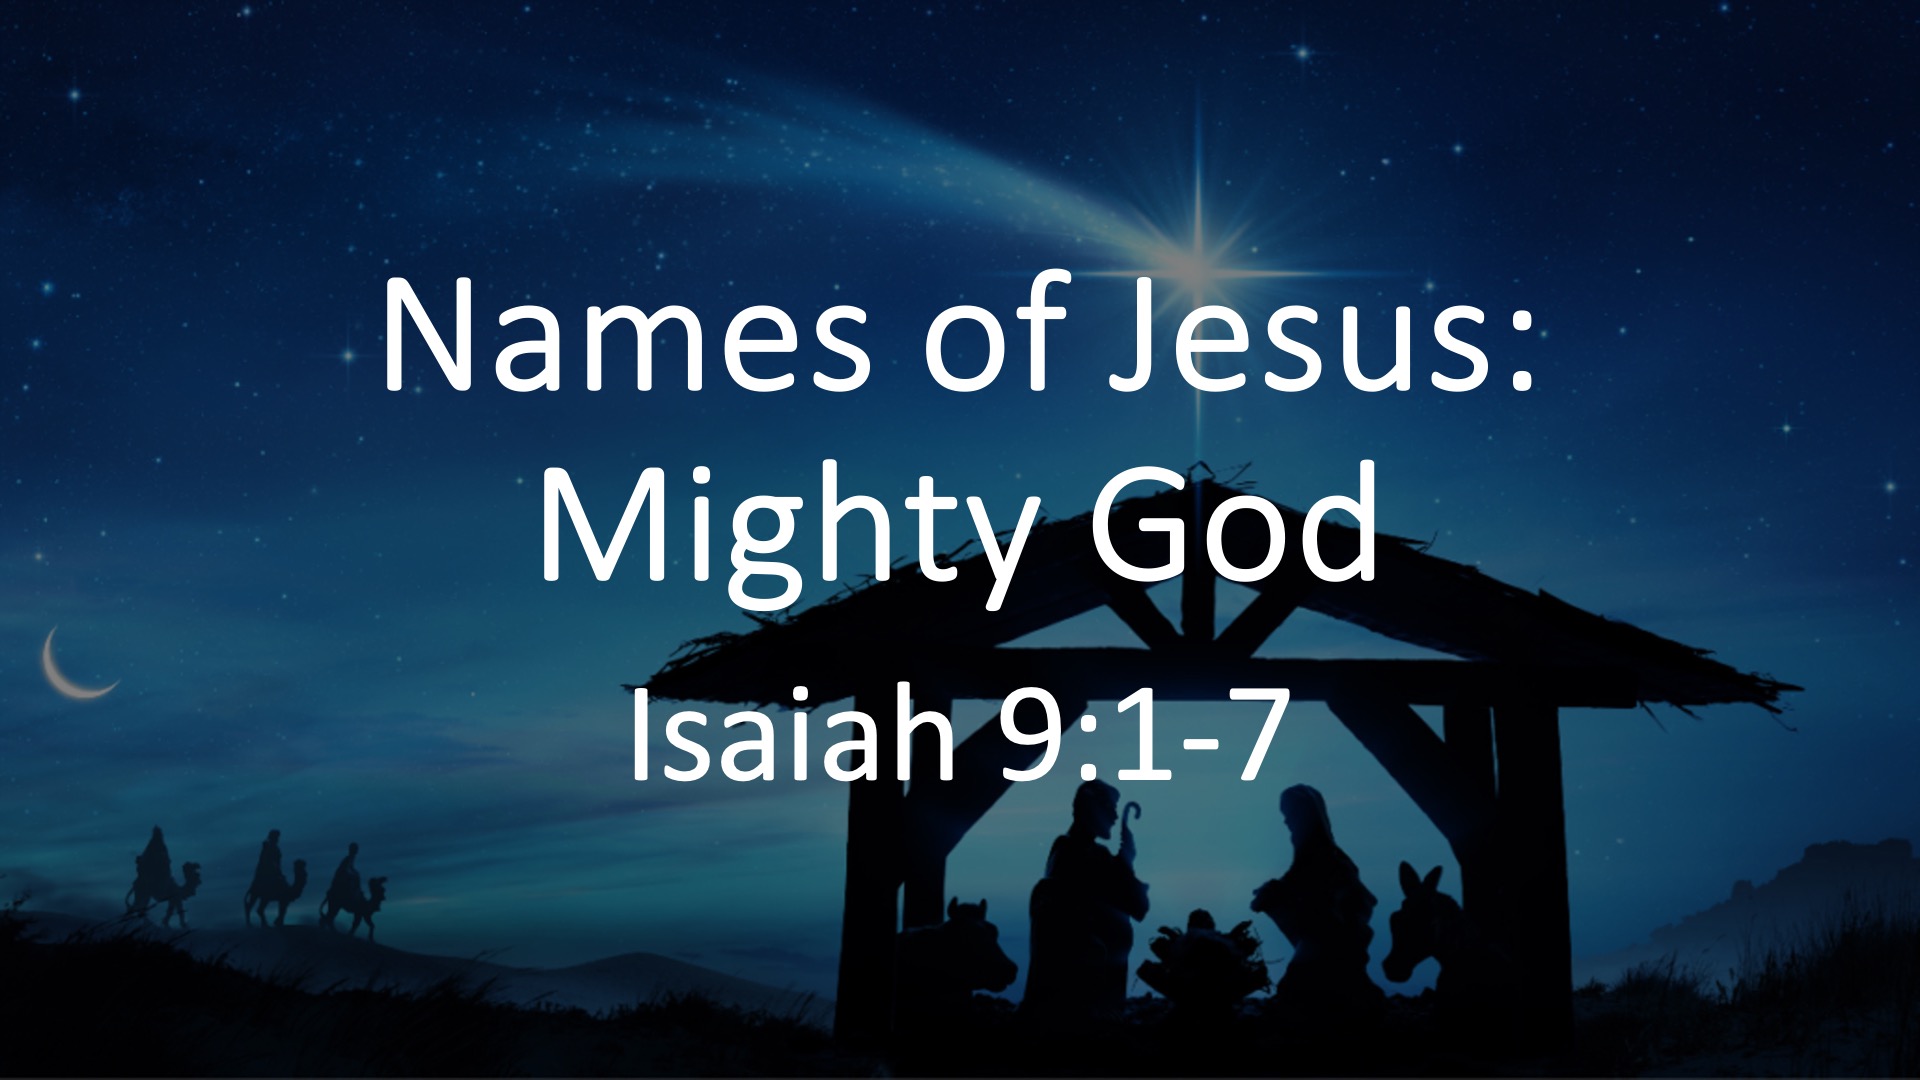 Names of Jesus - Mighty God